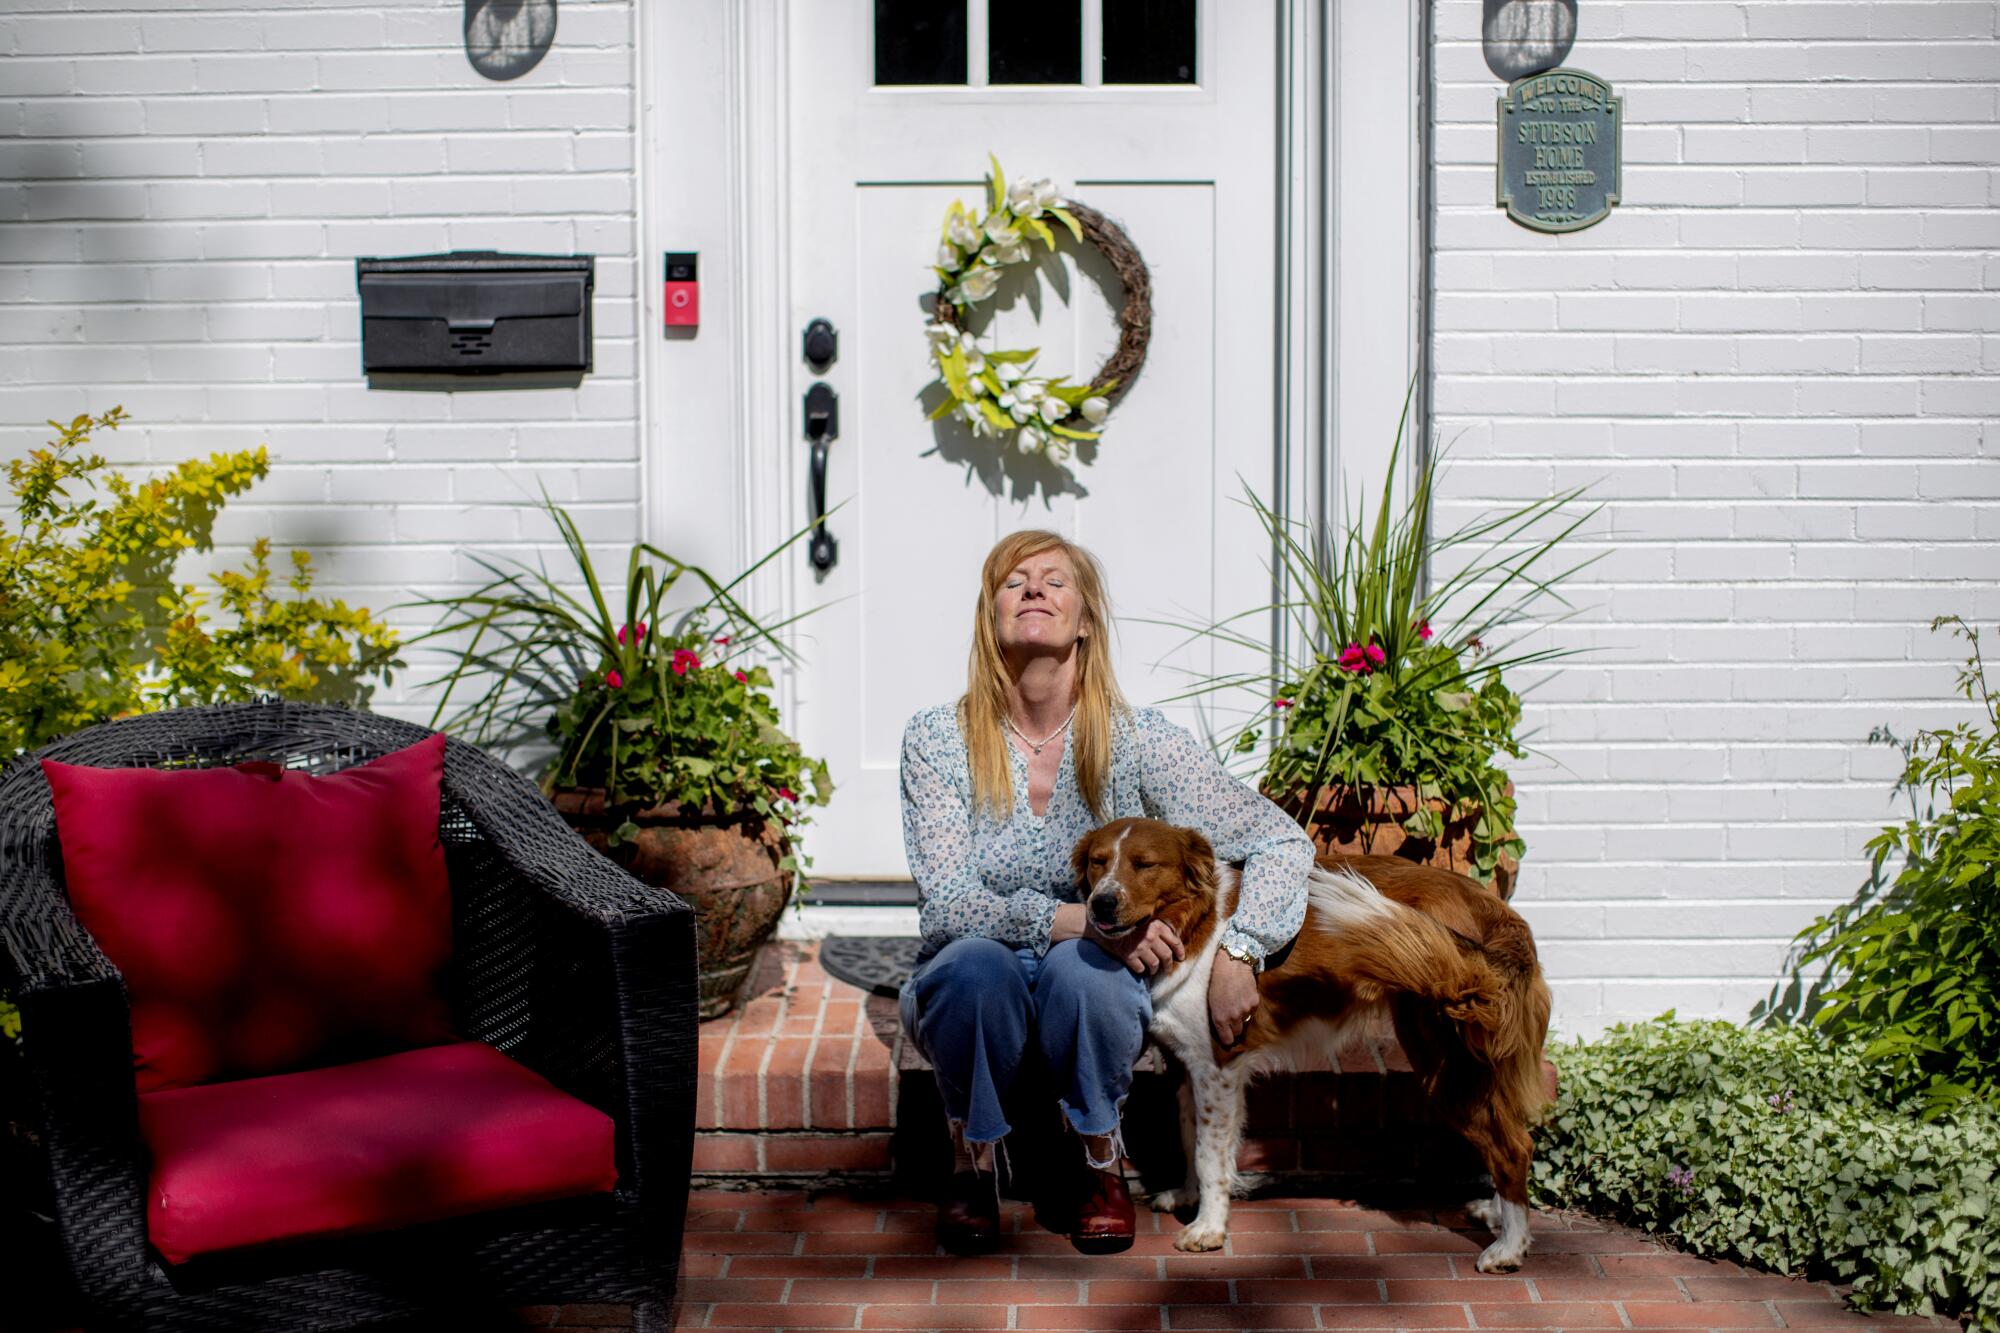 A woman with her dog on a porch